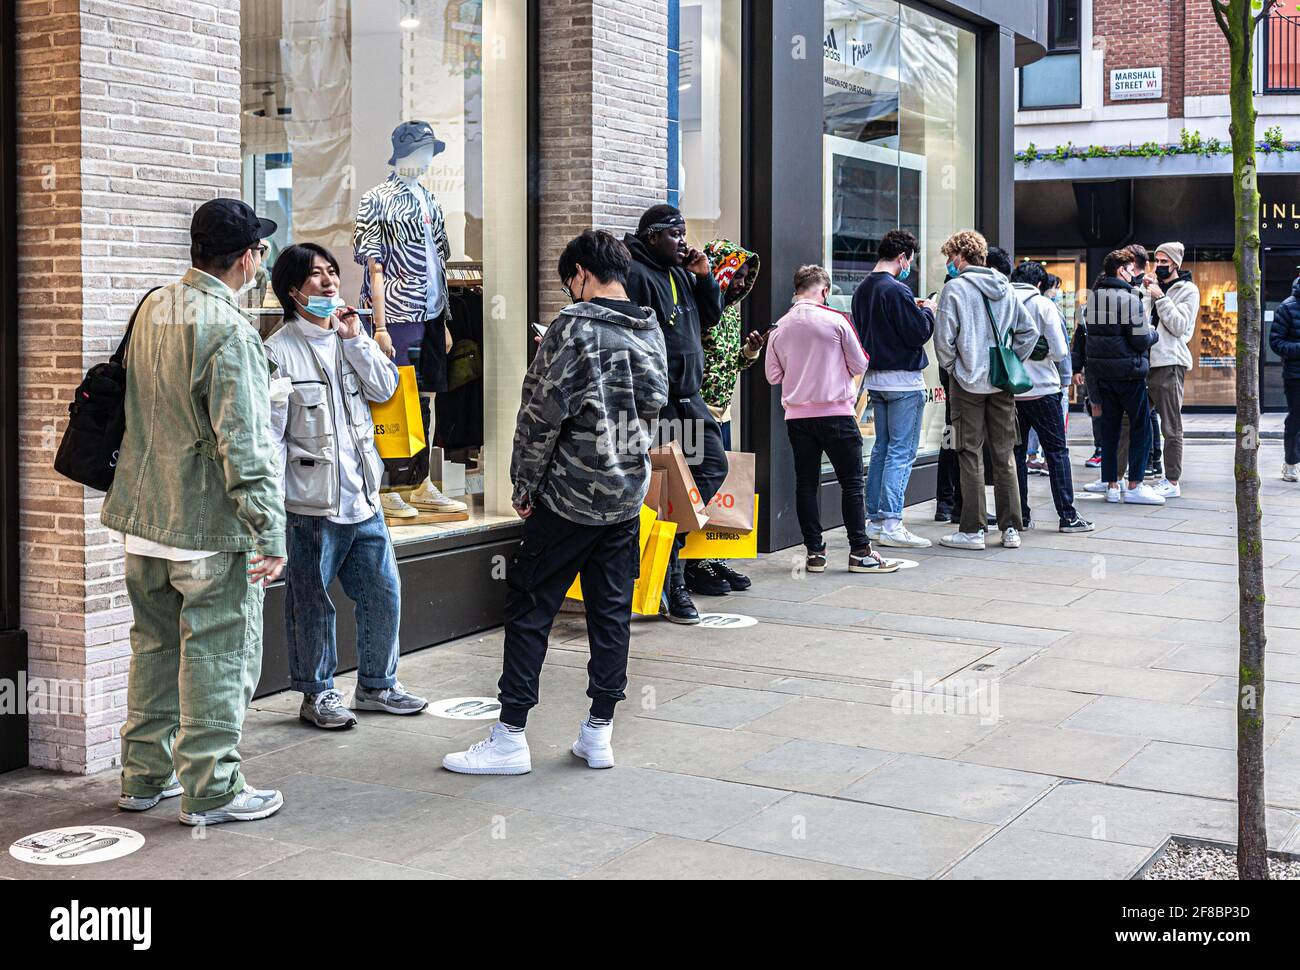 Shoppers standing in queue outside a sports shop, Soho, London, England, UK. Stock Photo